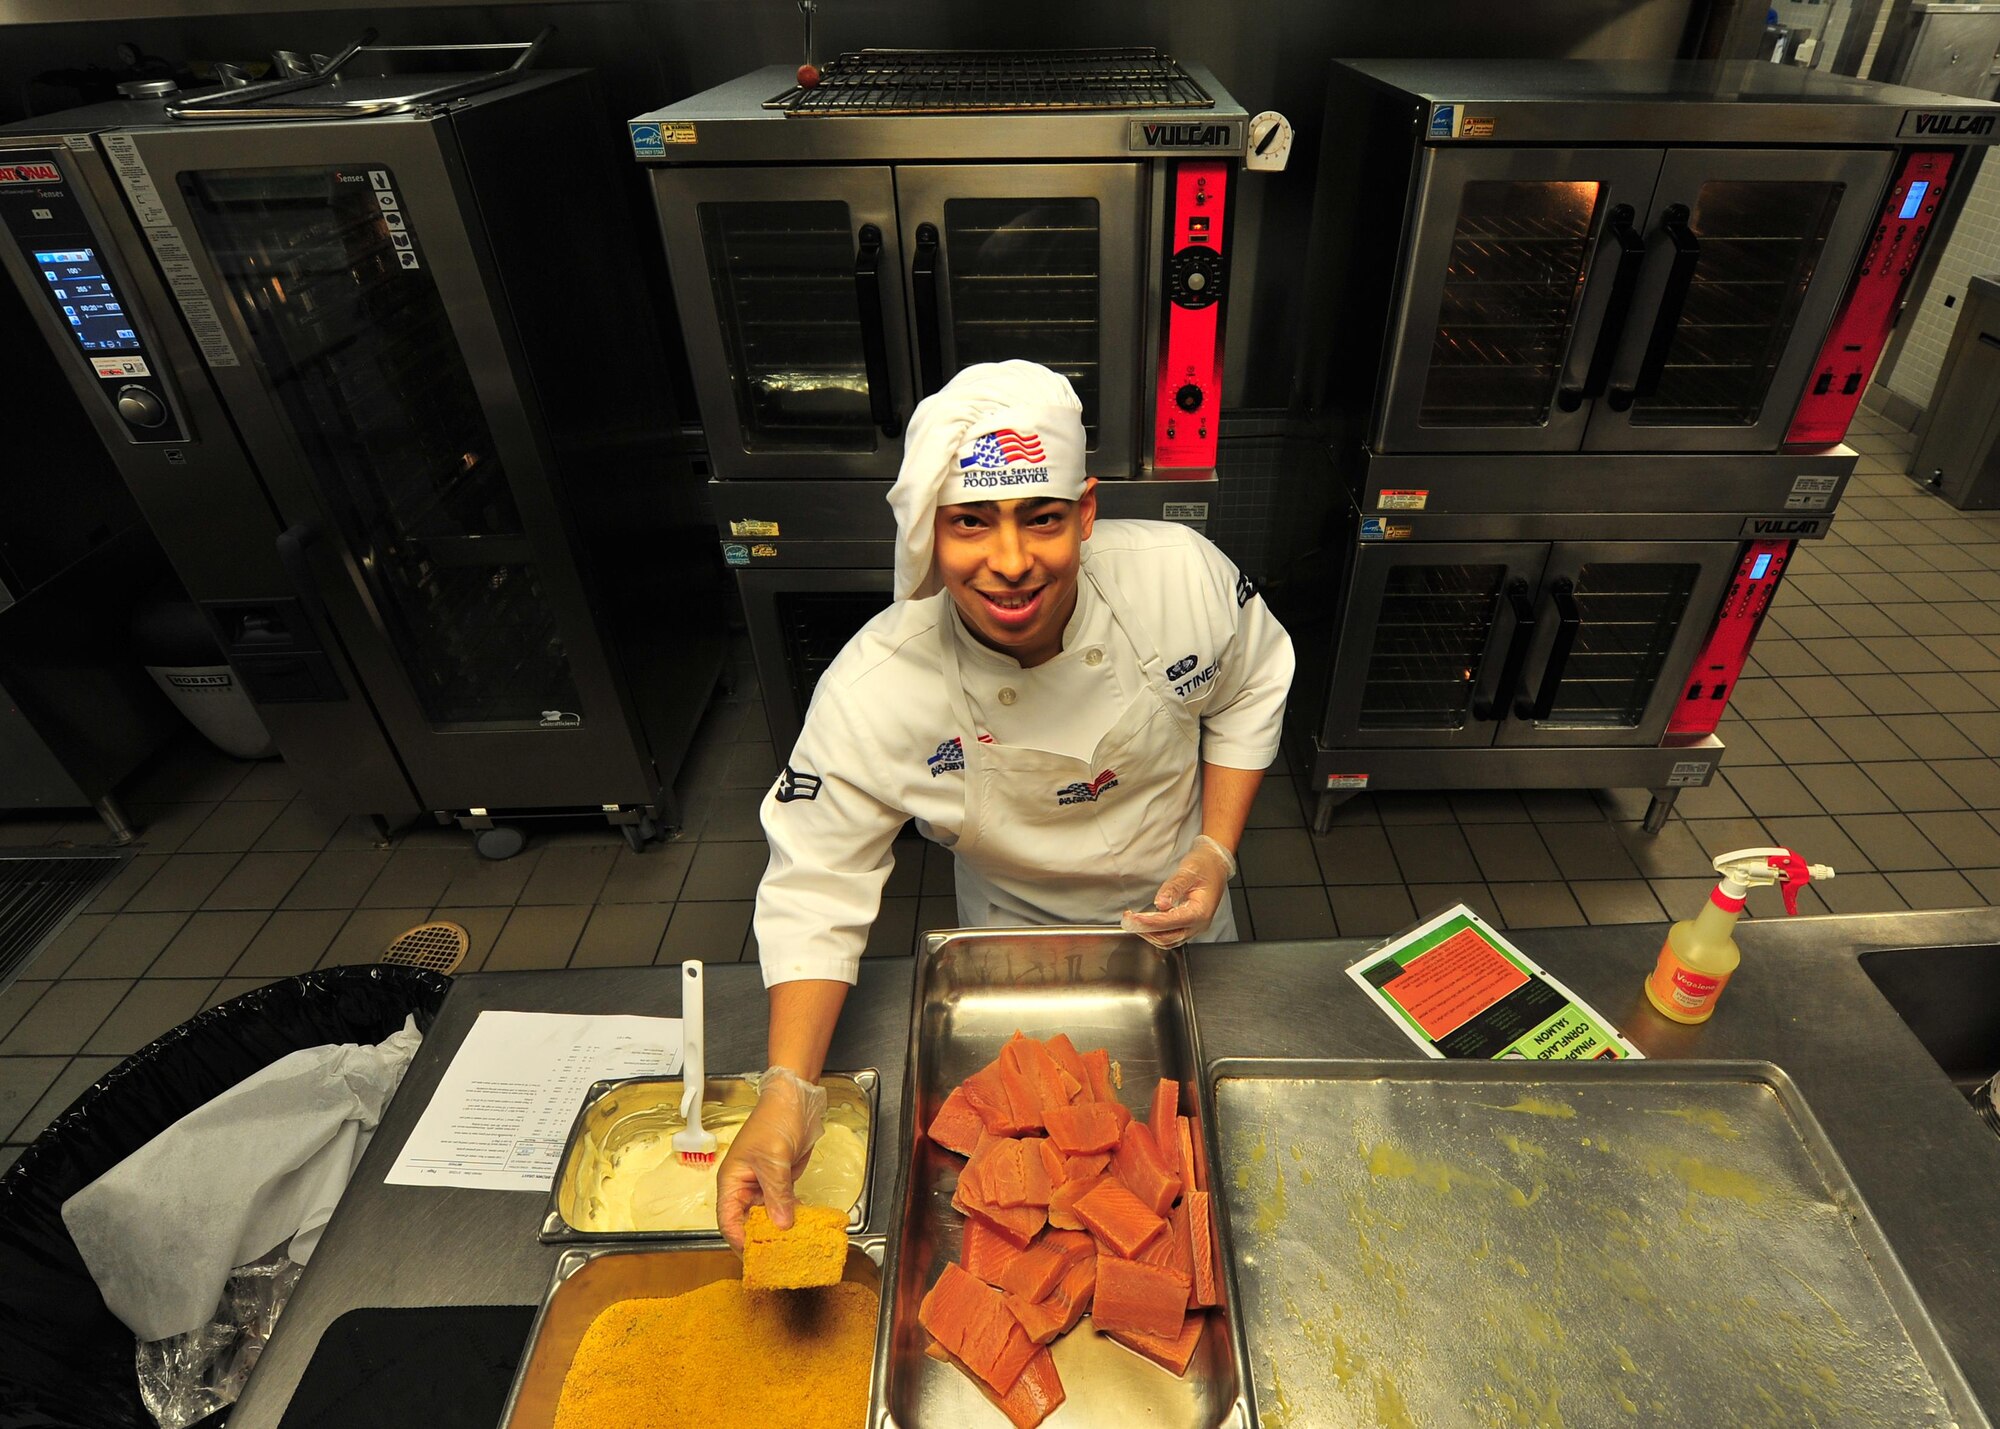 Airman 1st Class Jonathan Martinez, 1st Special Operations Force Support Squadron food services journeyman, prepares breaded salmon, April 8, 2015, at Hurlburt Field, Fla. Martinez was awarded the 2014 Hennessy Award for individual excellence in the food services career field. (U.S. Air Force photo by Airman 1st Class Ryan Conroy/Released)